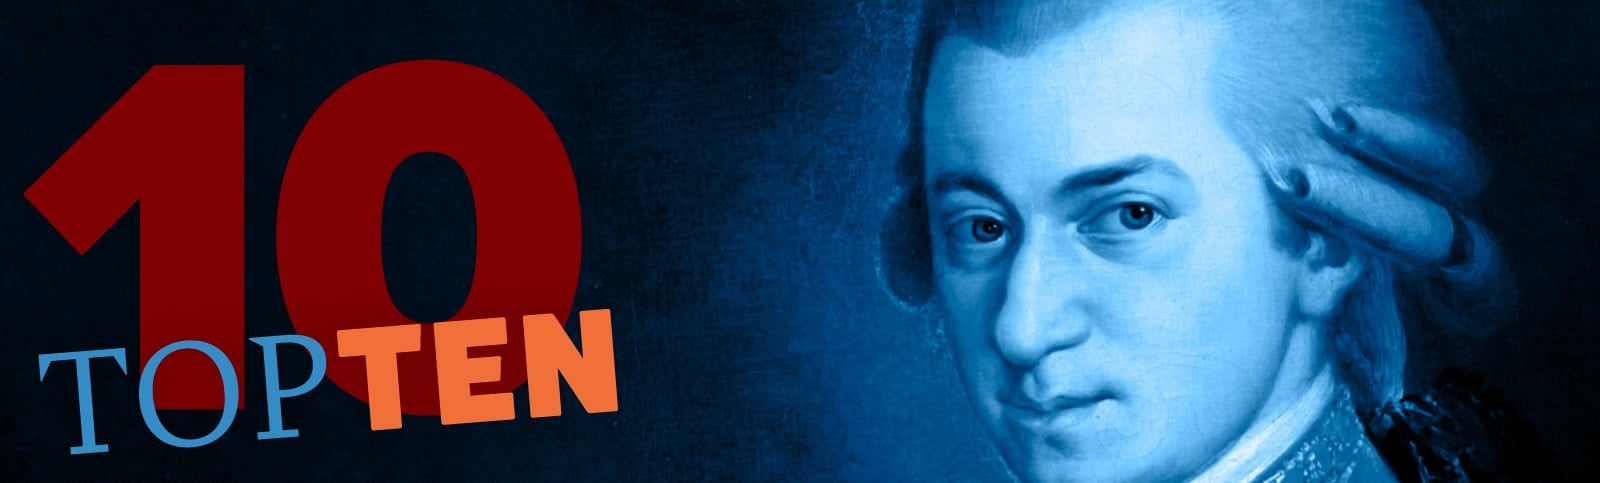 blue portrait of Mozart with a 10 and text "top ten" superimposed